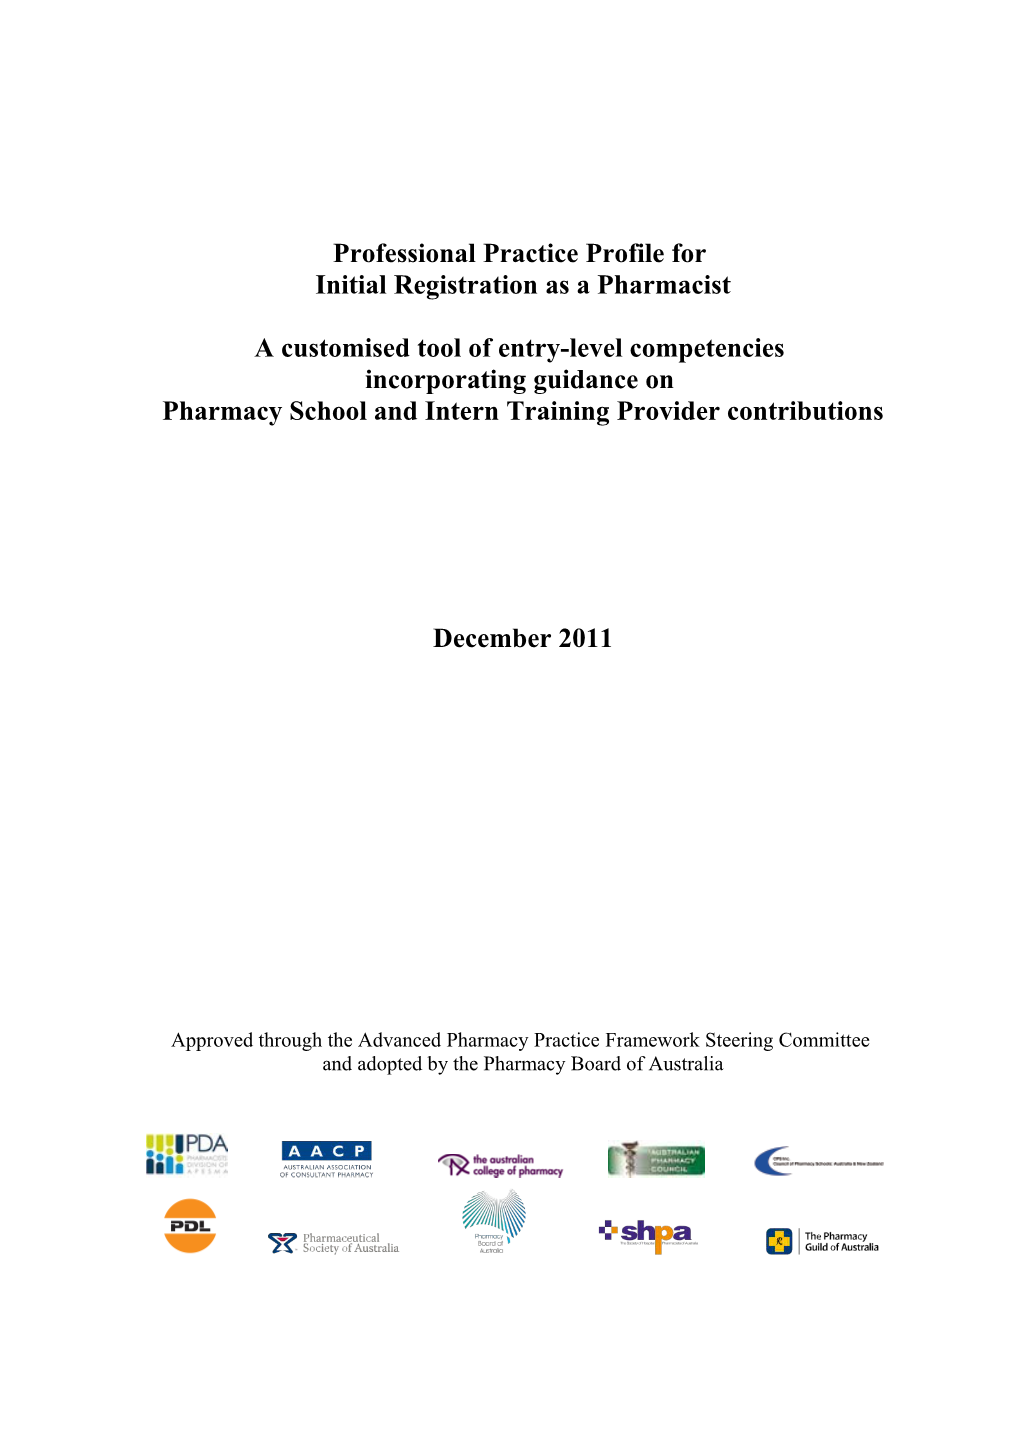 An Analysis of the Source of Learning and Development for Initial Registration As a Pharmacist